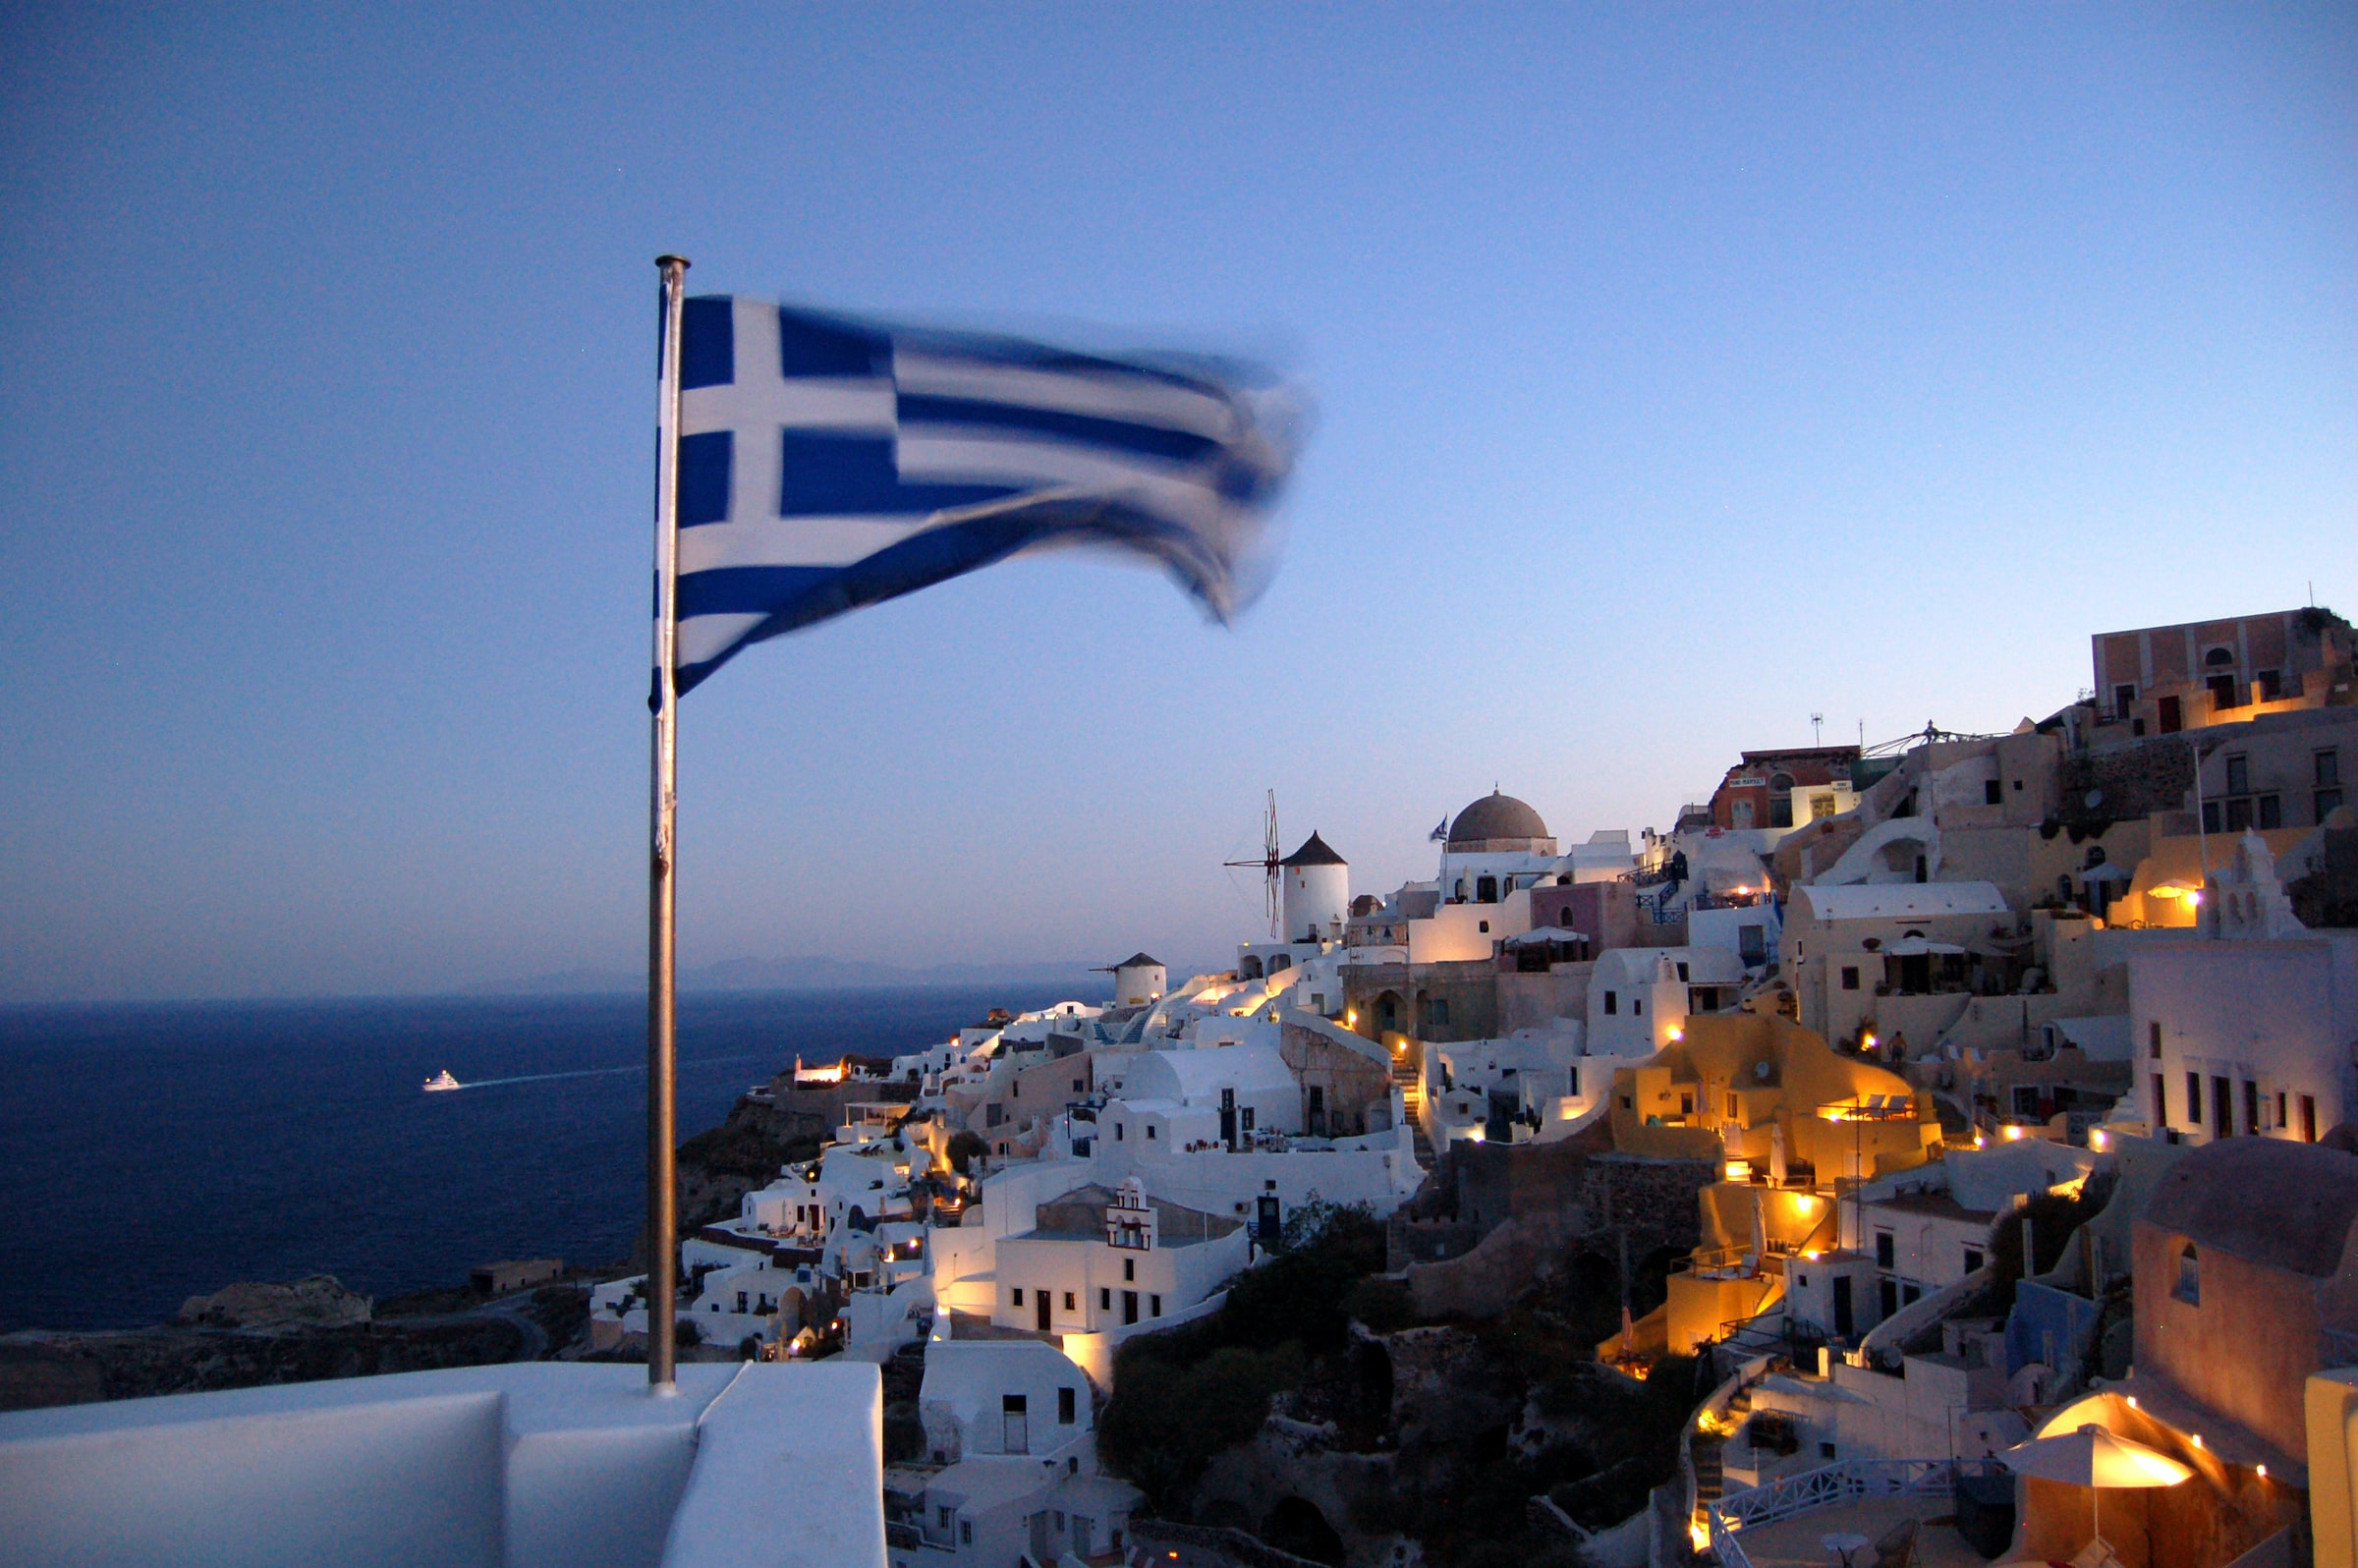 Greece’s Hydrogen Future To Be Redefined Through Technology